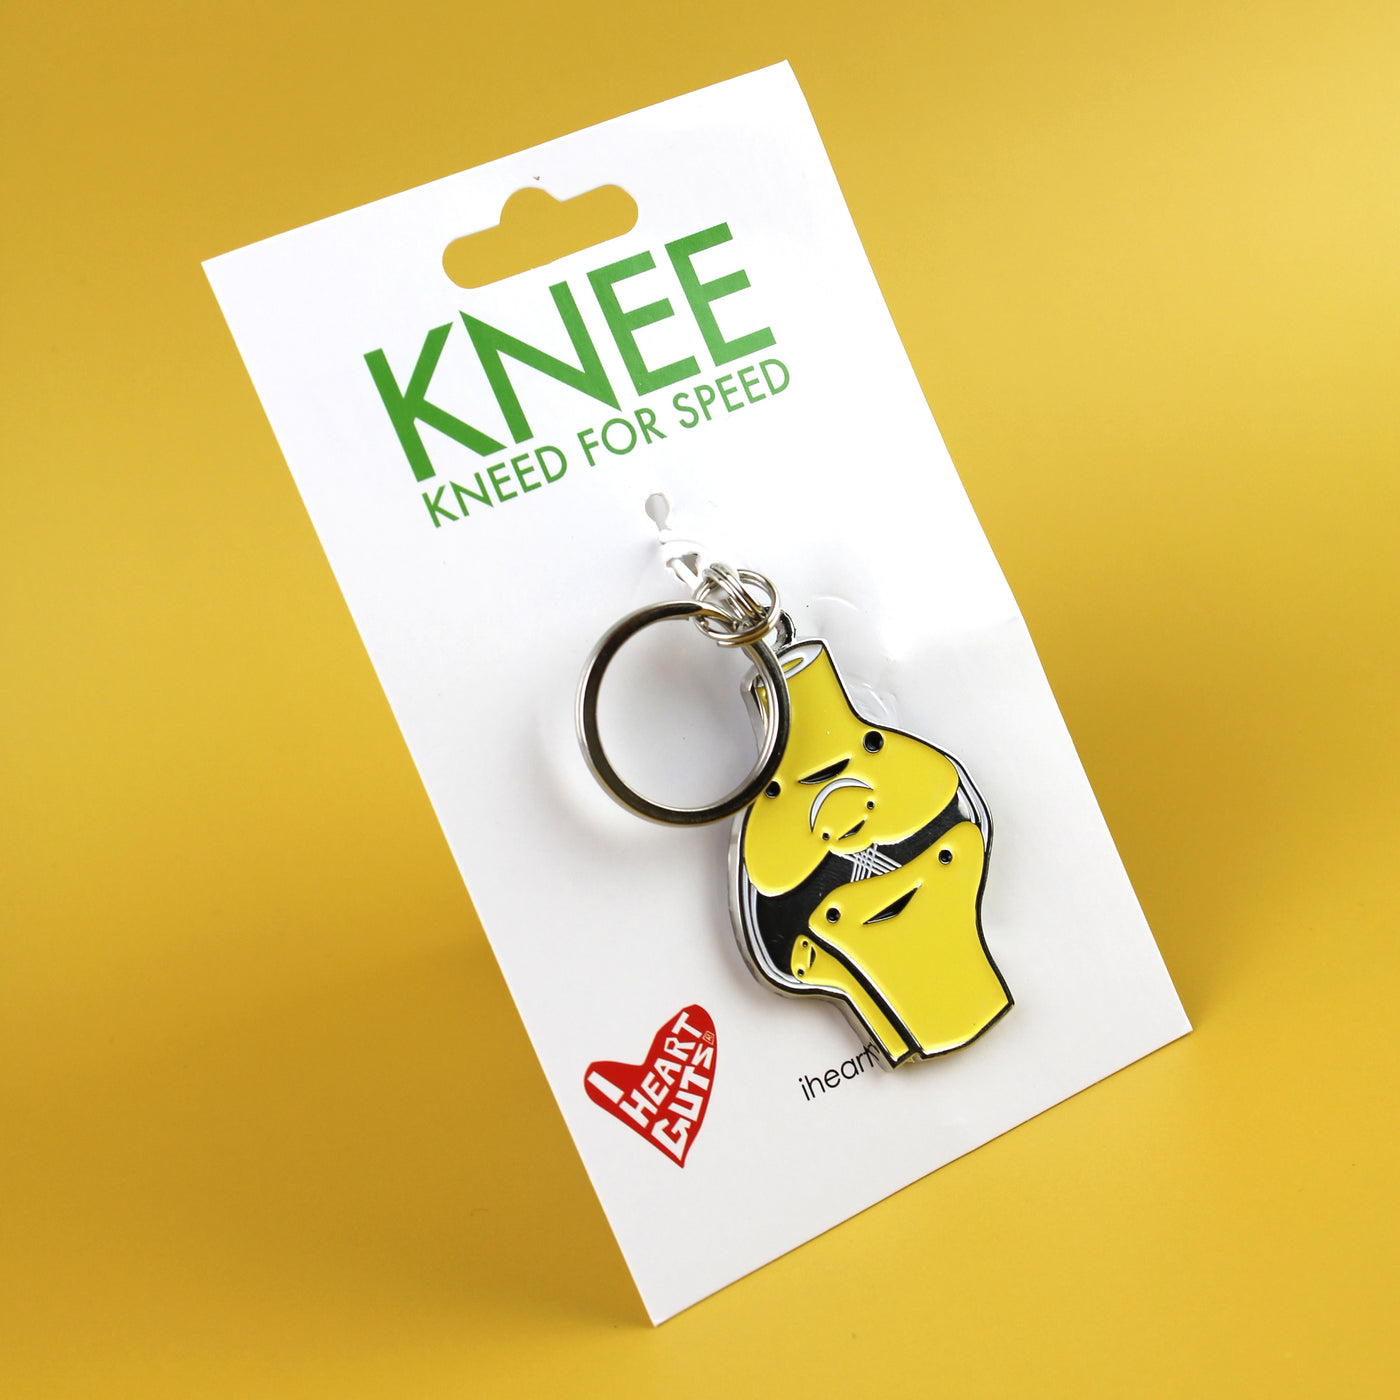 Knee Enamel Keychain - Kneed for Speed - Knee Replacement Surgery Gift - I Heart Guts